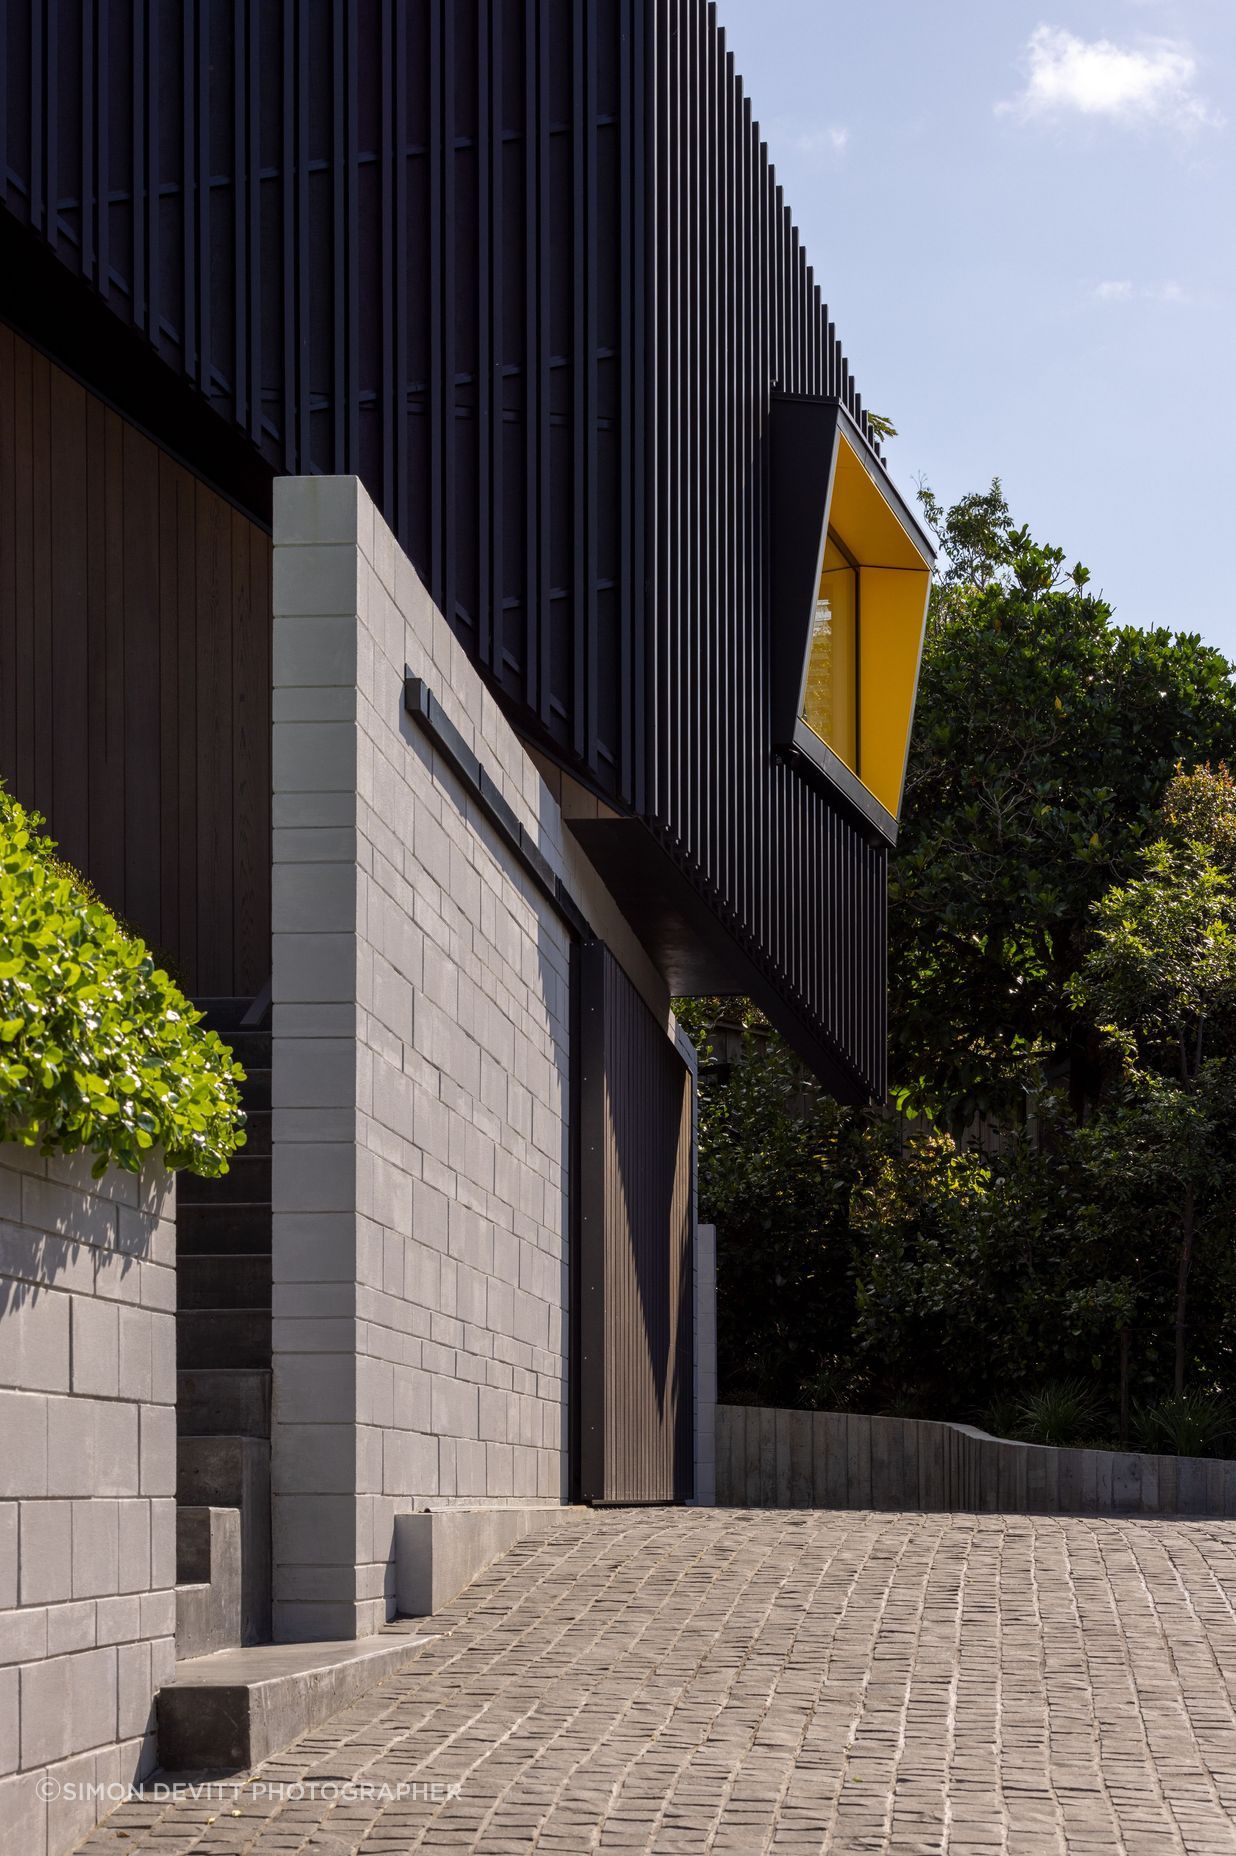 Angular windows with bright yellow soffits are orientated towards the views.